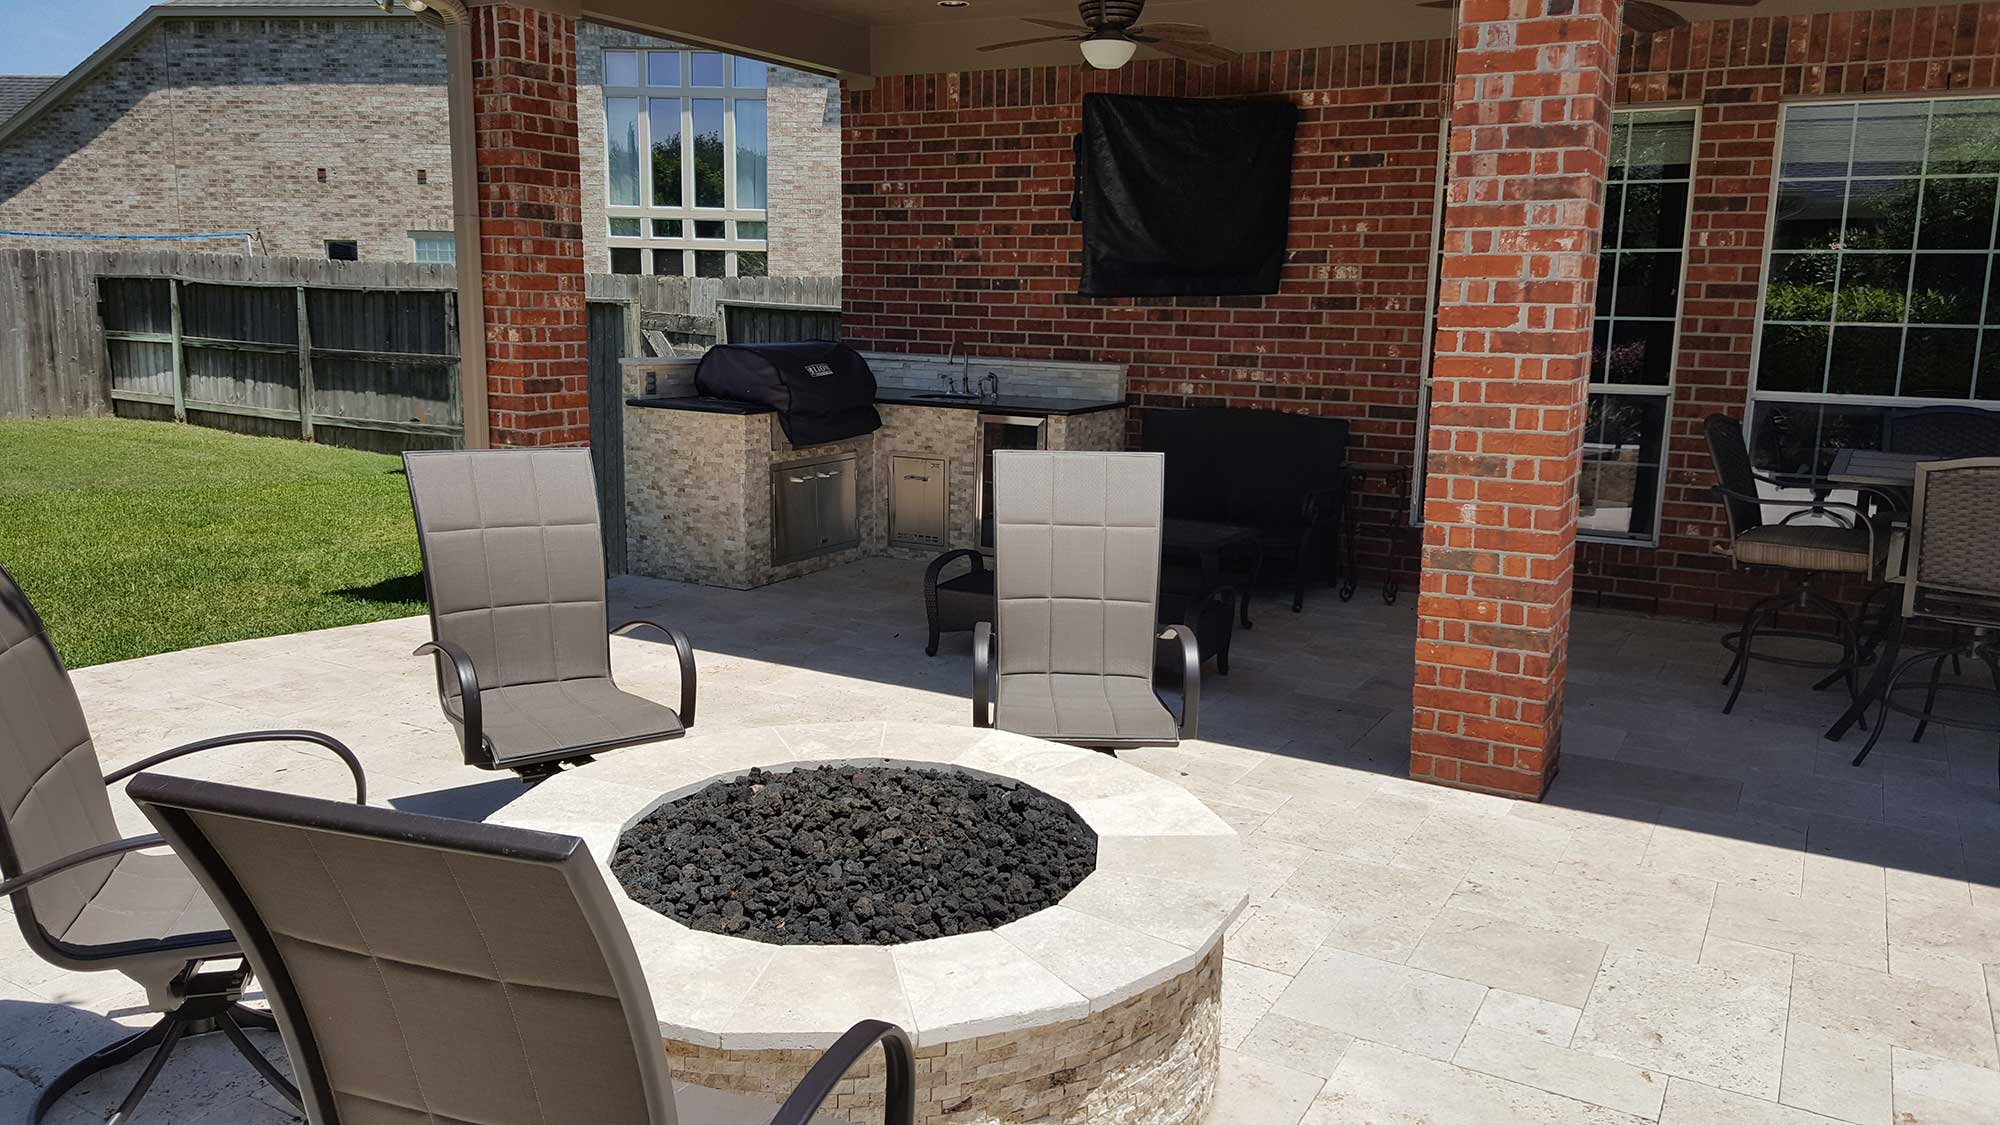 3 Modern Fire Pit Creations, Courtyard Creations Inc Fire Pit